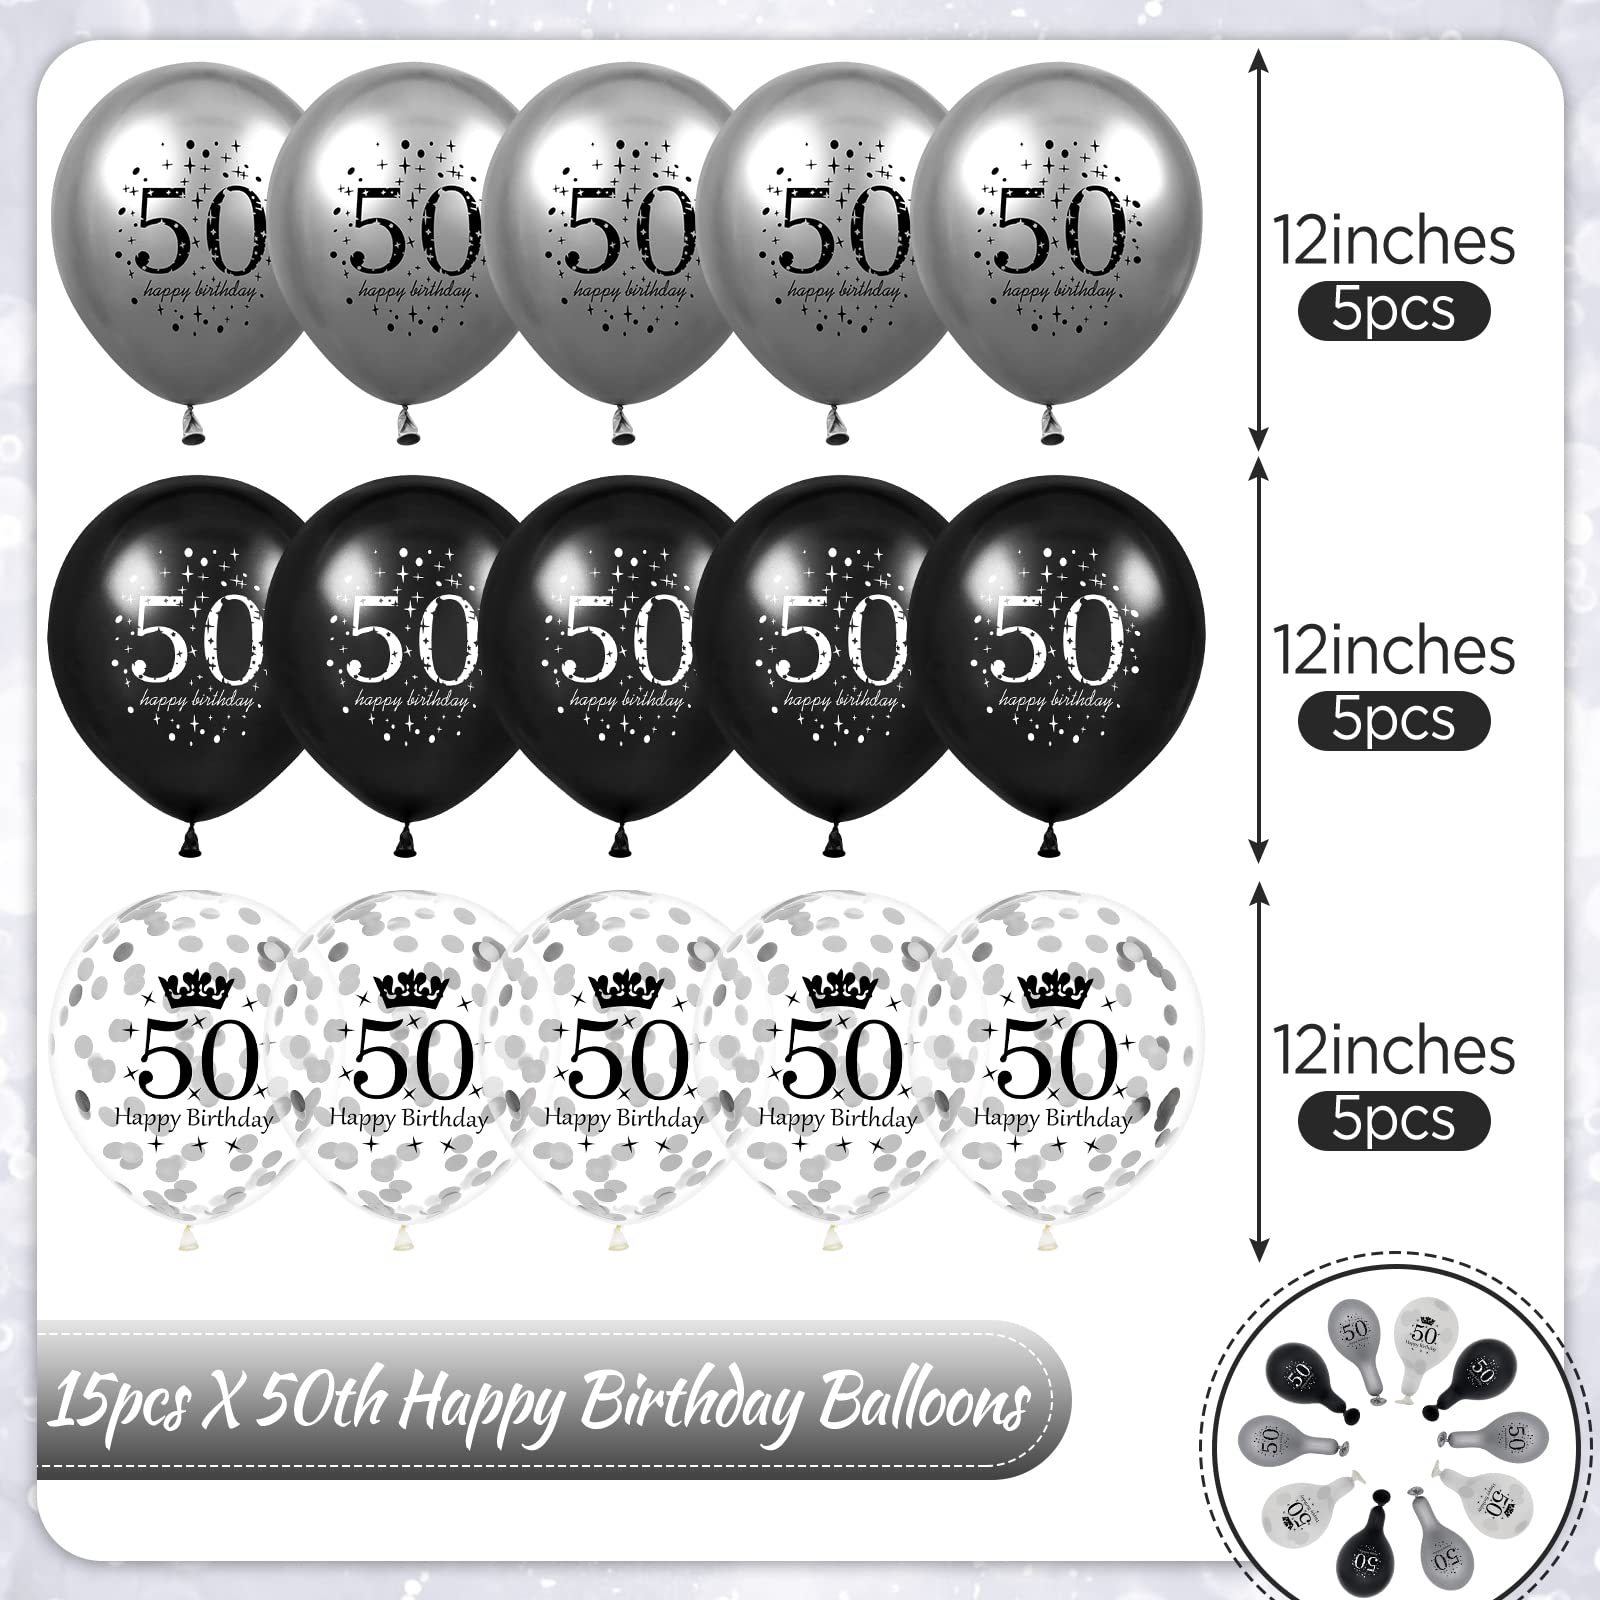 50th Birthday Balloons Decorations 15pcs Black Silver Happy 50th Birthday Party Latex Confetti Balloons for Men Women 50th Anniversary Happy Birthday Party Decor Supplies 12 inches